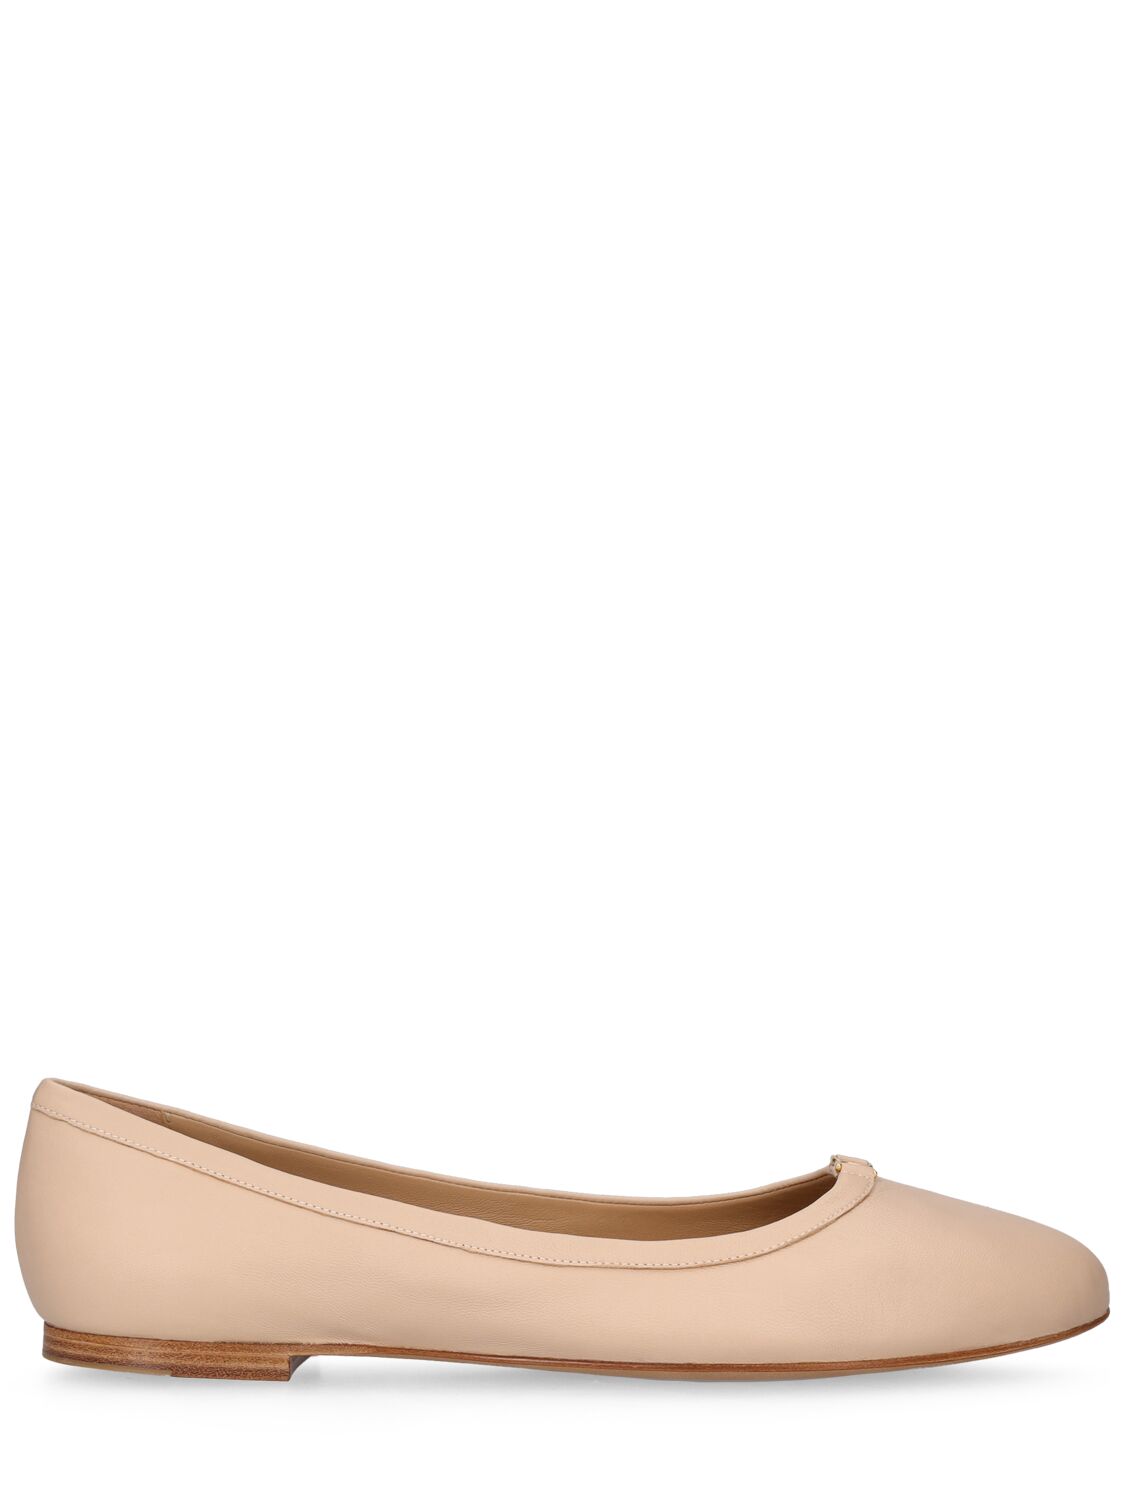 Shop Chloé 10mm Marcie Leather Ballerina Flats In Nude